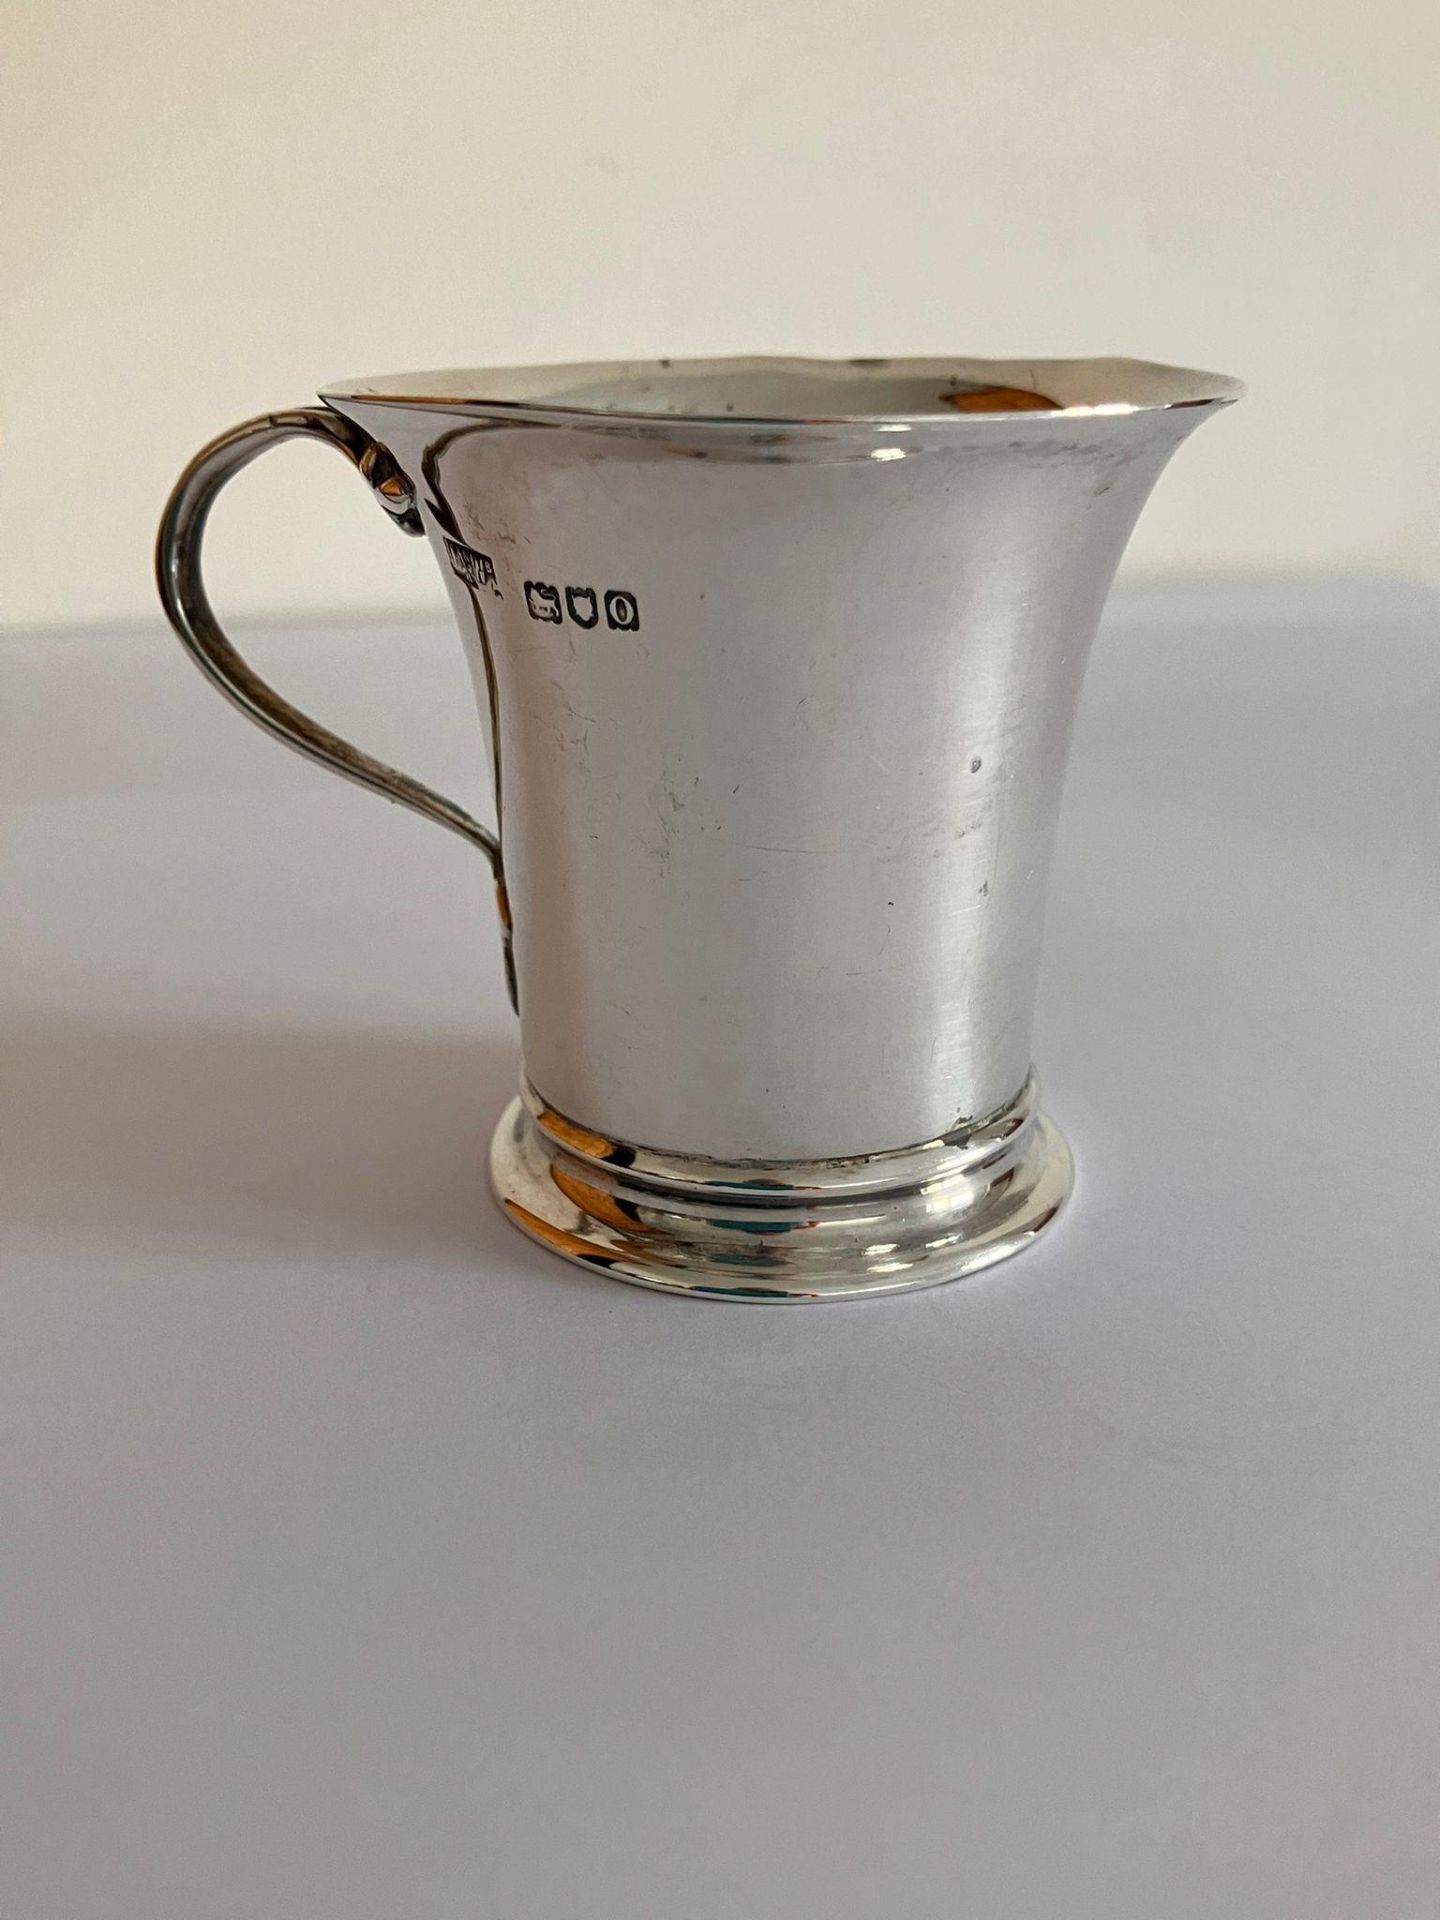 Antique MAPPIN and WEBB SILVER BABY MUG. Full hallmark for Mappin and Webb London 1909. Incredible